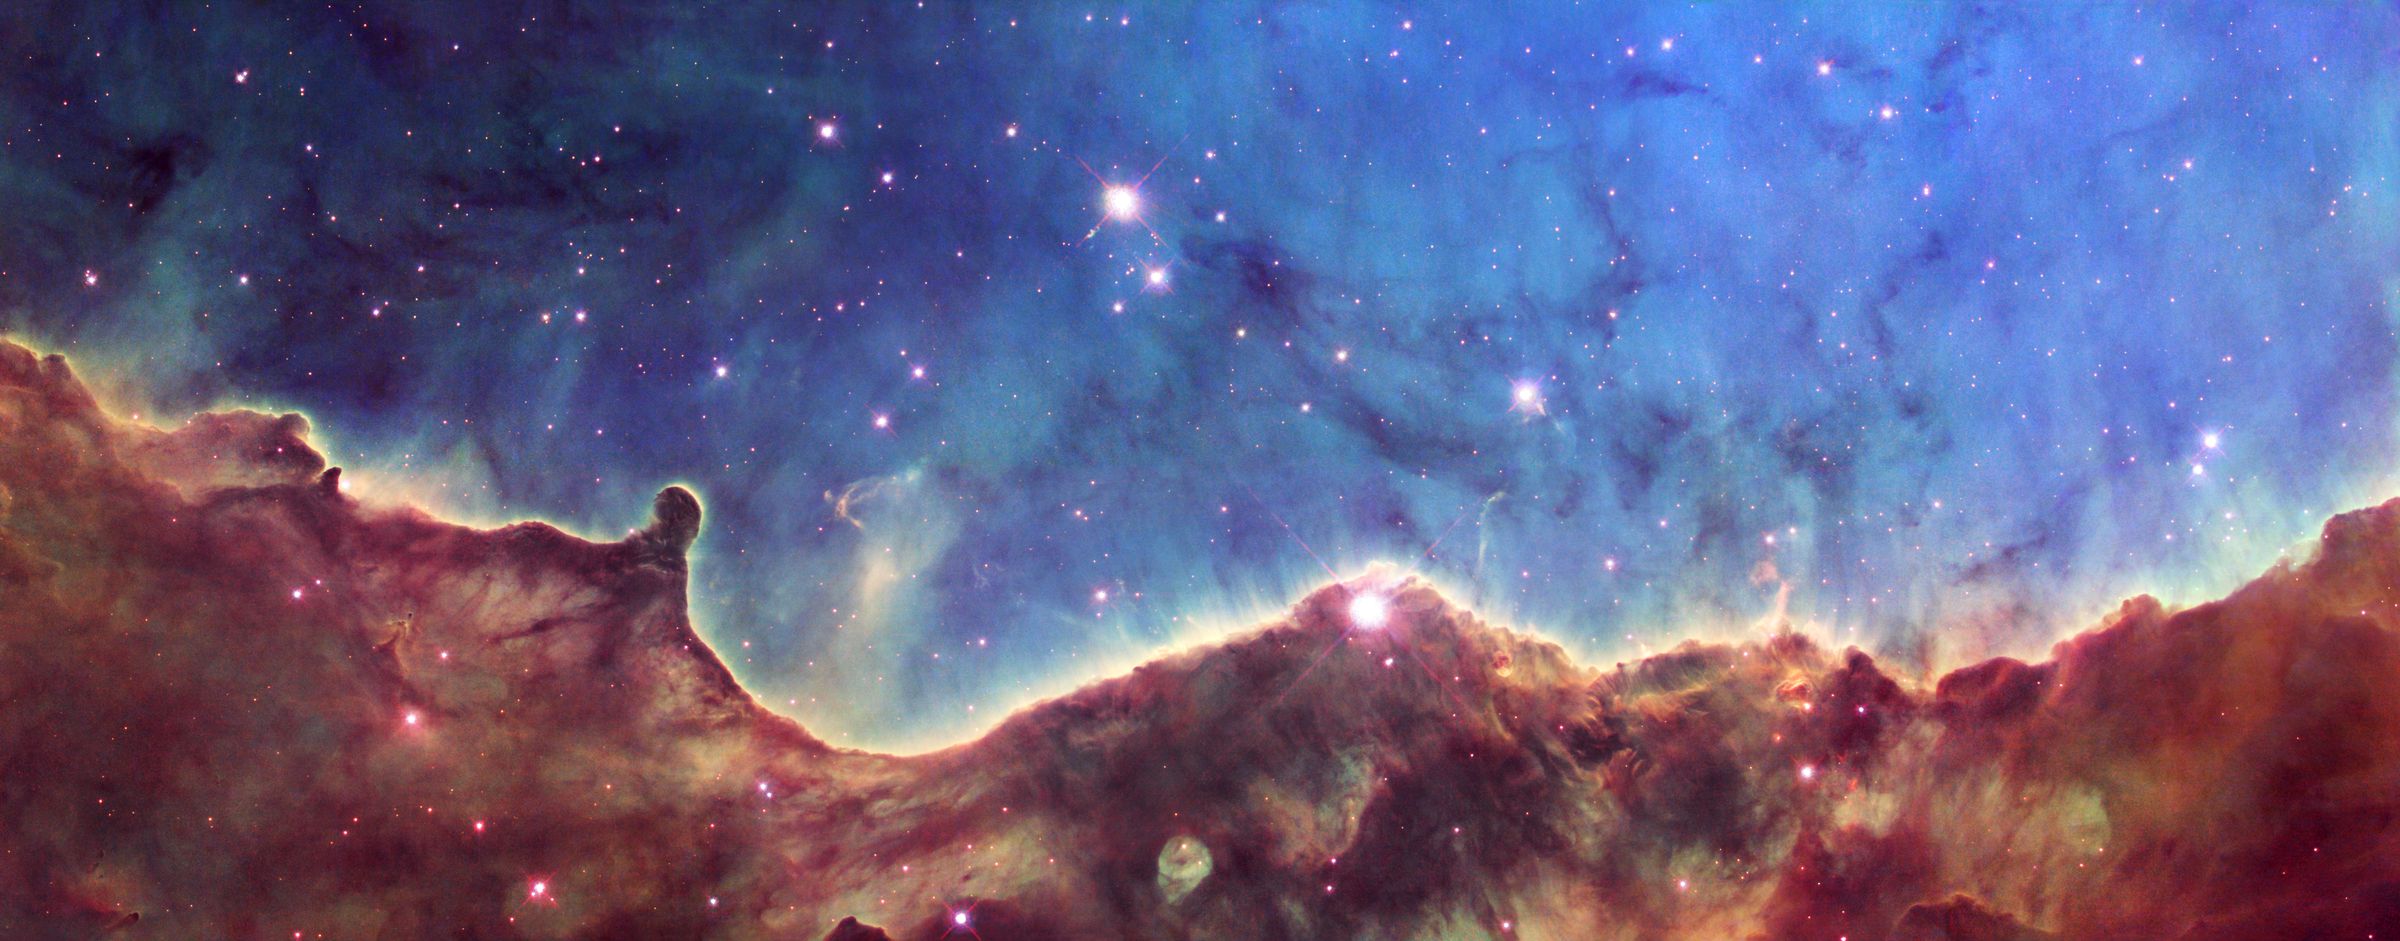 Hubble’s view of the Carina Nebula’s “Cosmic Cliffs.”